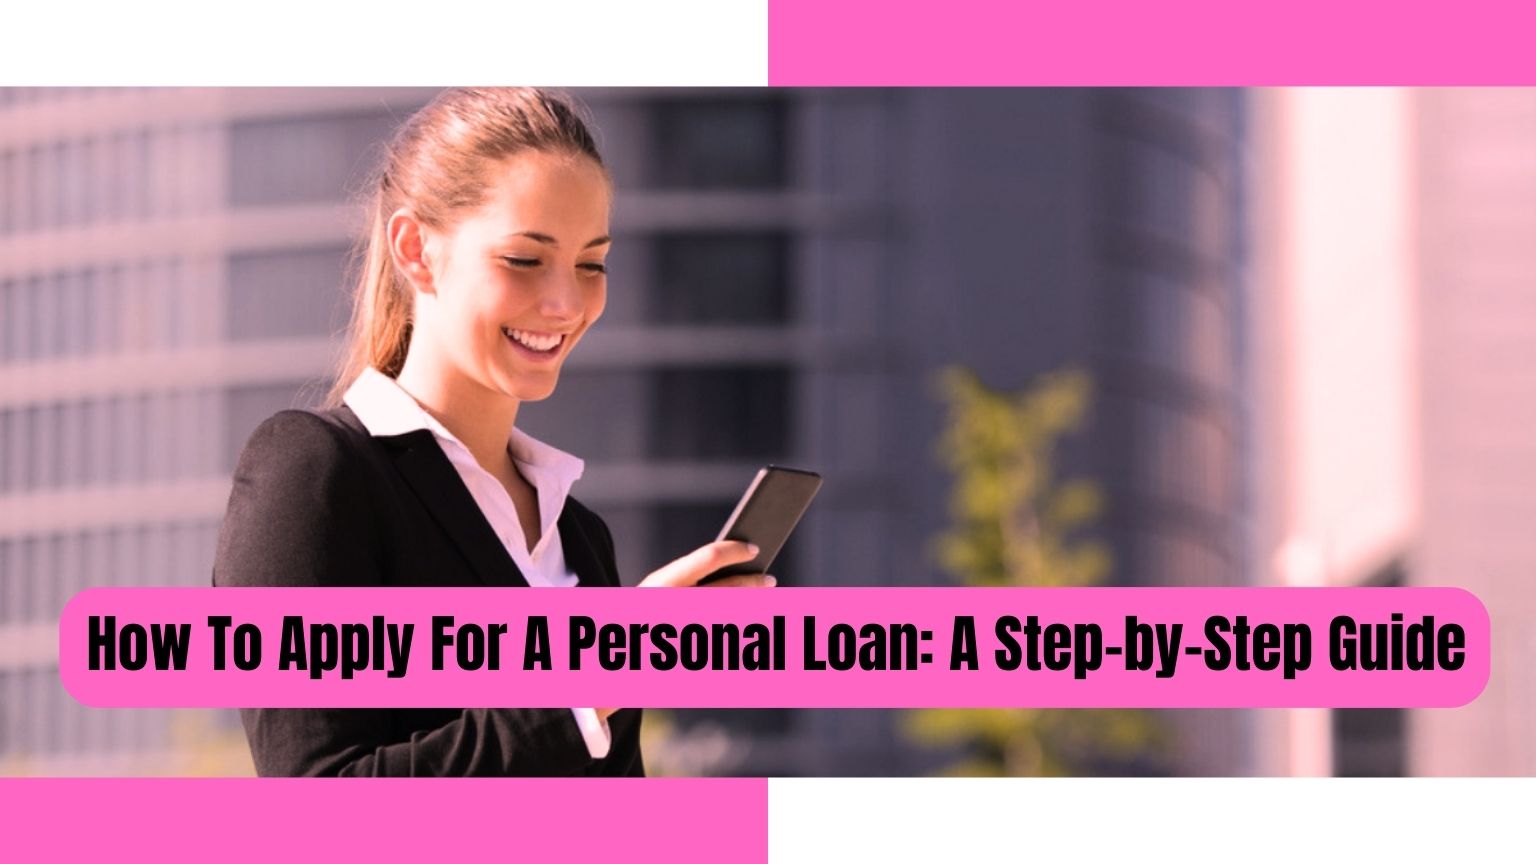 How To Apply For A Personal Loan: A Step-by-Step Guide